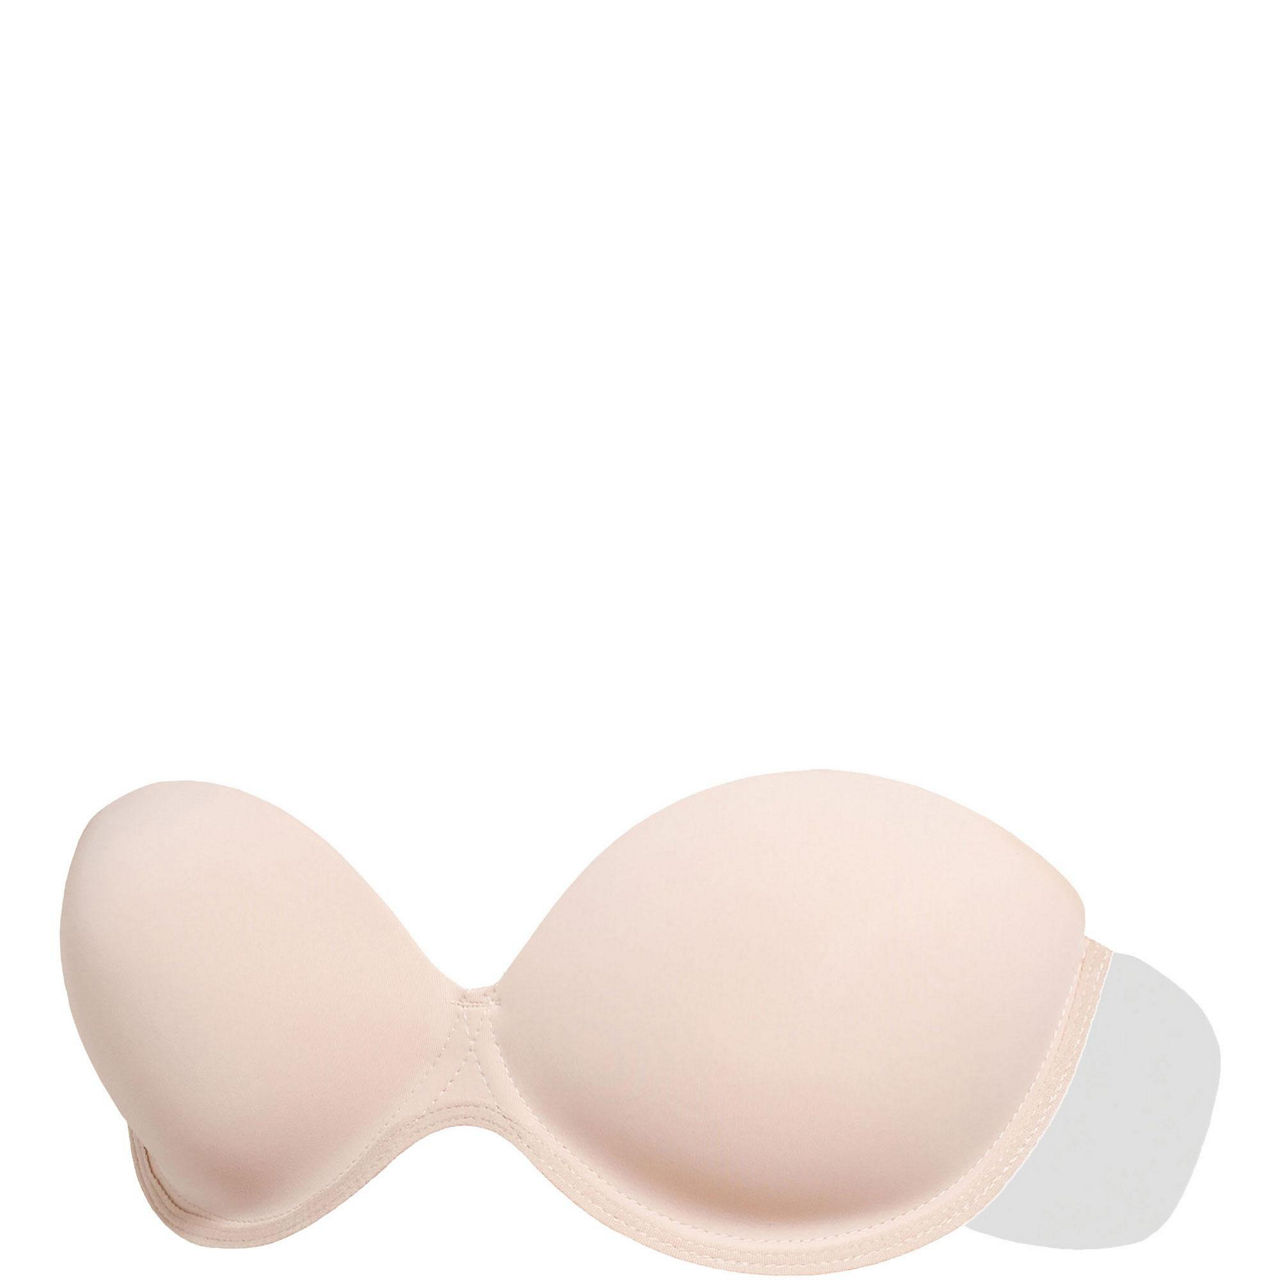 Fashion Forms Volumptuous Backless Strapless Bra  Strapless backless bra,  Strapless shapewear, Strapless bra